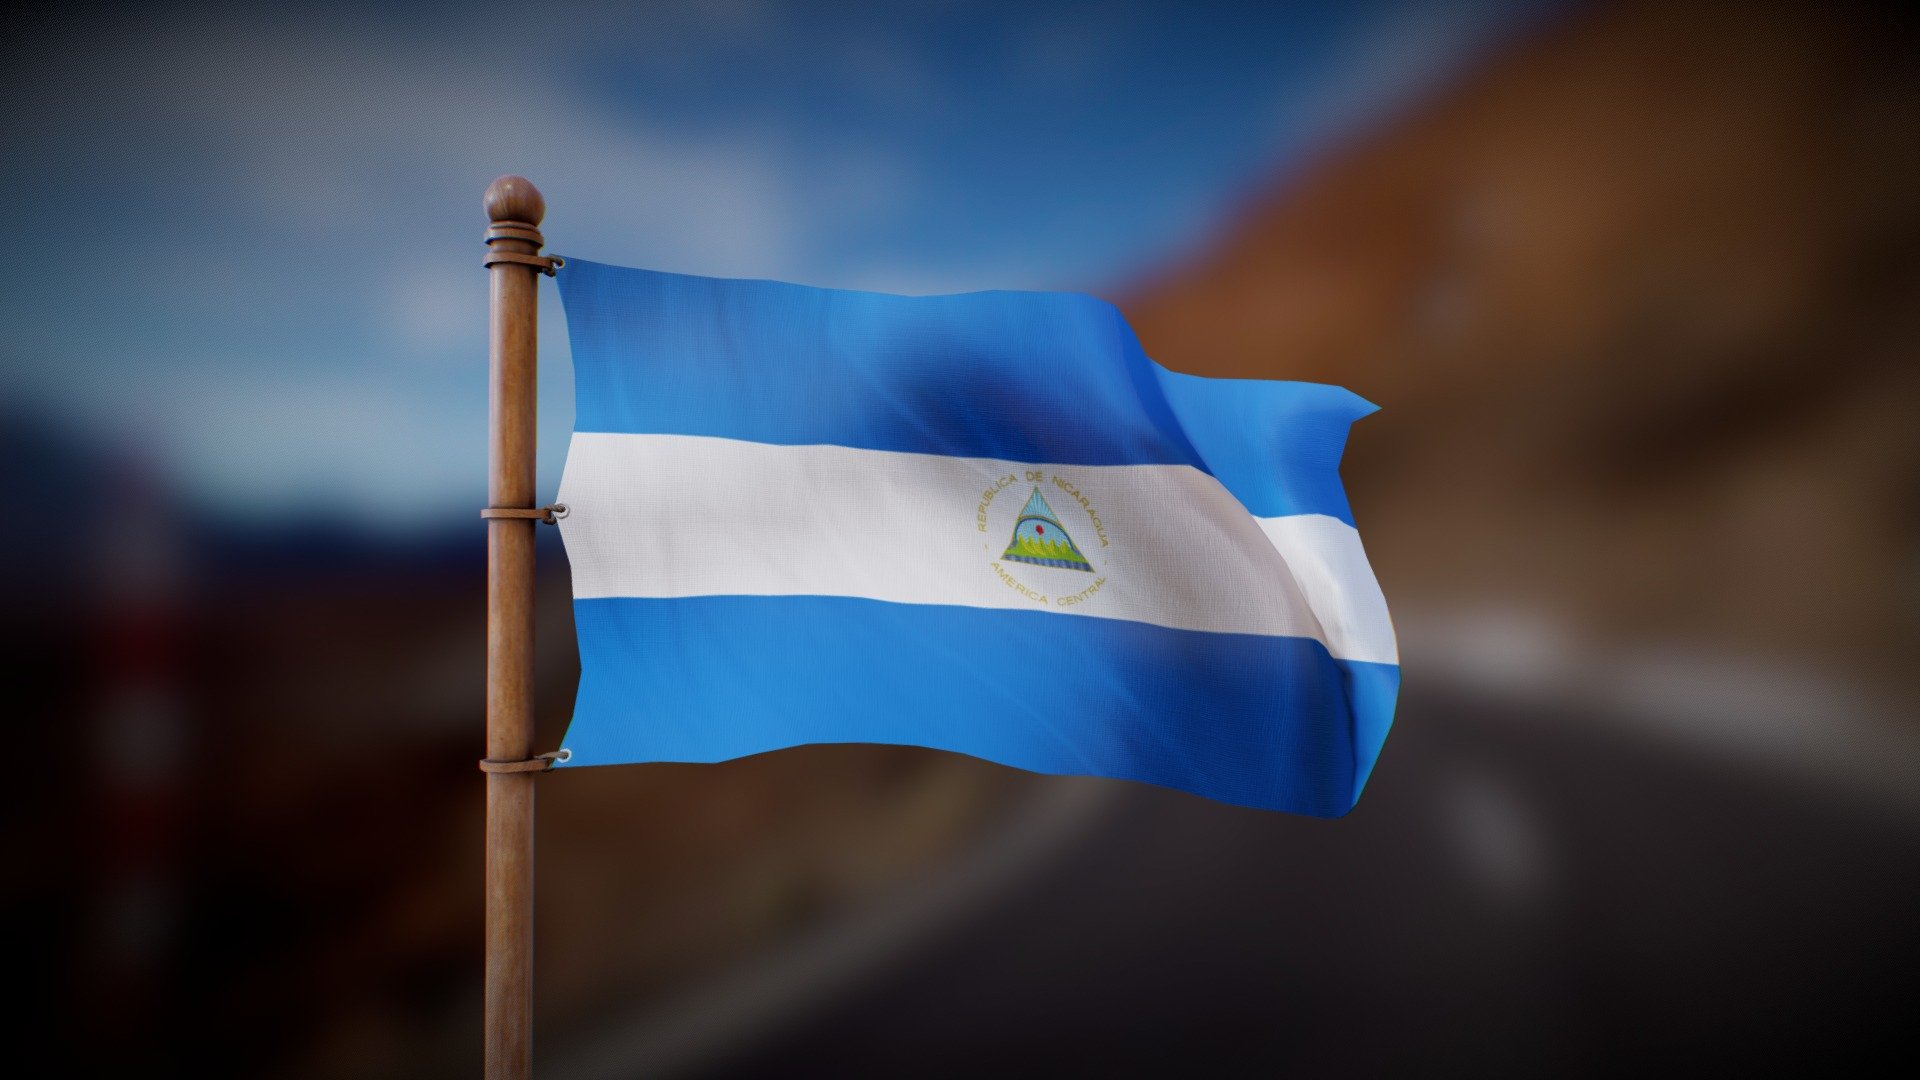 Flag waving in the wind in a looped animation

Joint Animation, perfect for any purpose
4K PBR textures

Feel free to DM me for anu question of custom requests :) - Flag of Nicaragua - Wind Animated loop - Buy Royalty Free 3D model by Deftroy 3d model